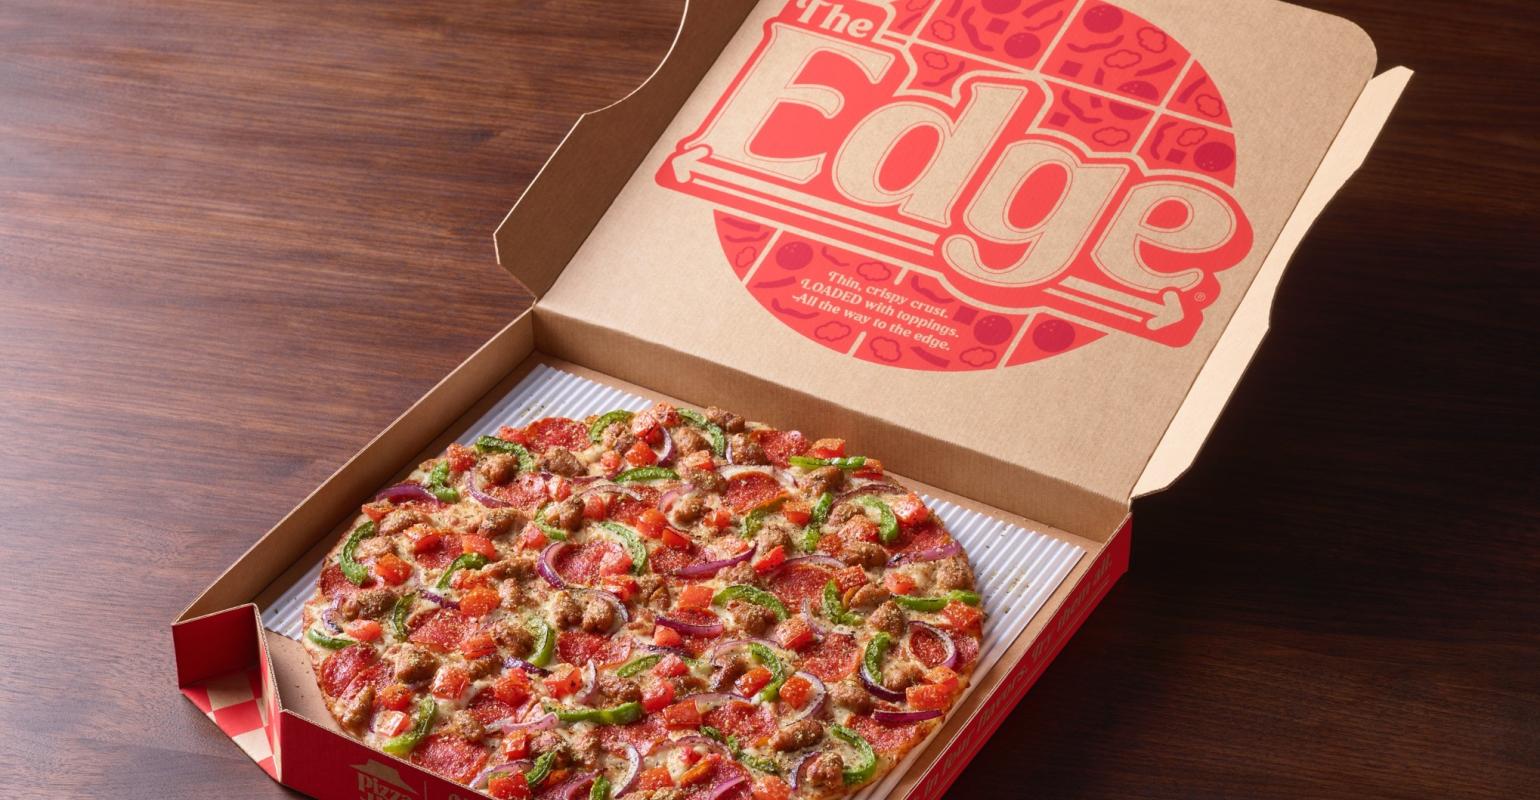 Pizza Hut brings back ‘The Edge’ thincrust pizza Nation's Restaurant